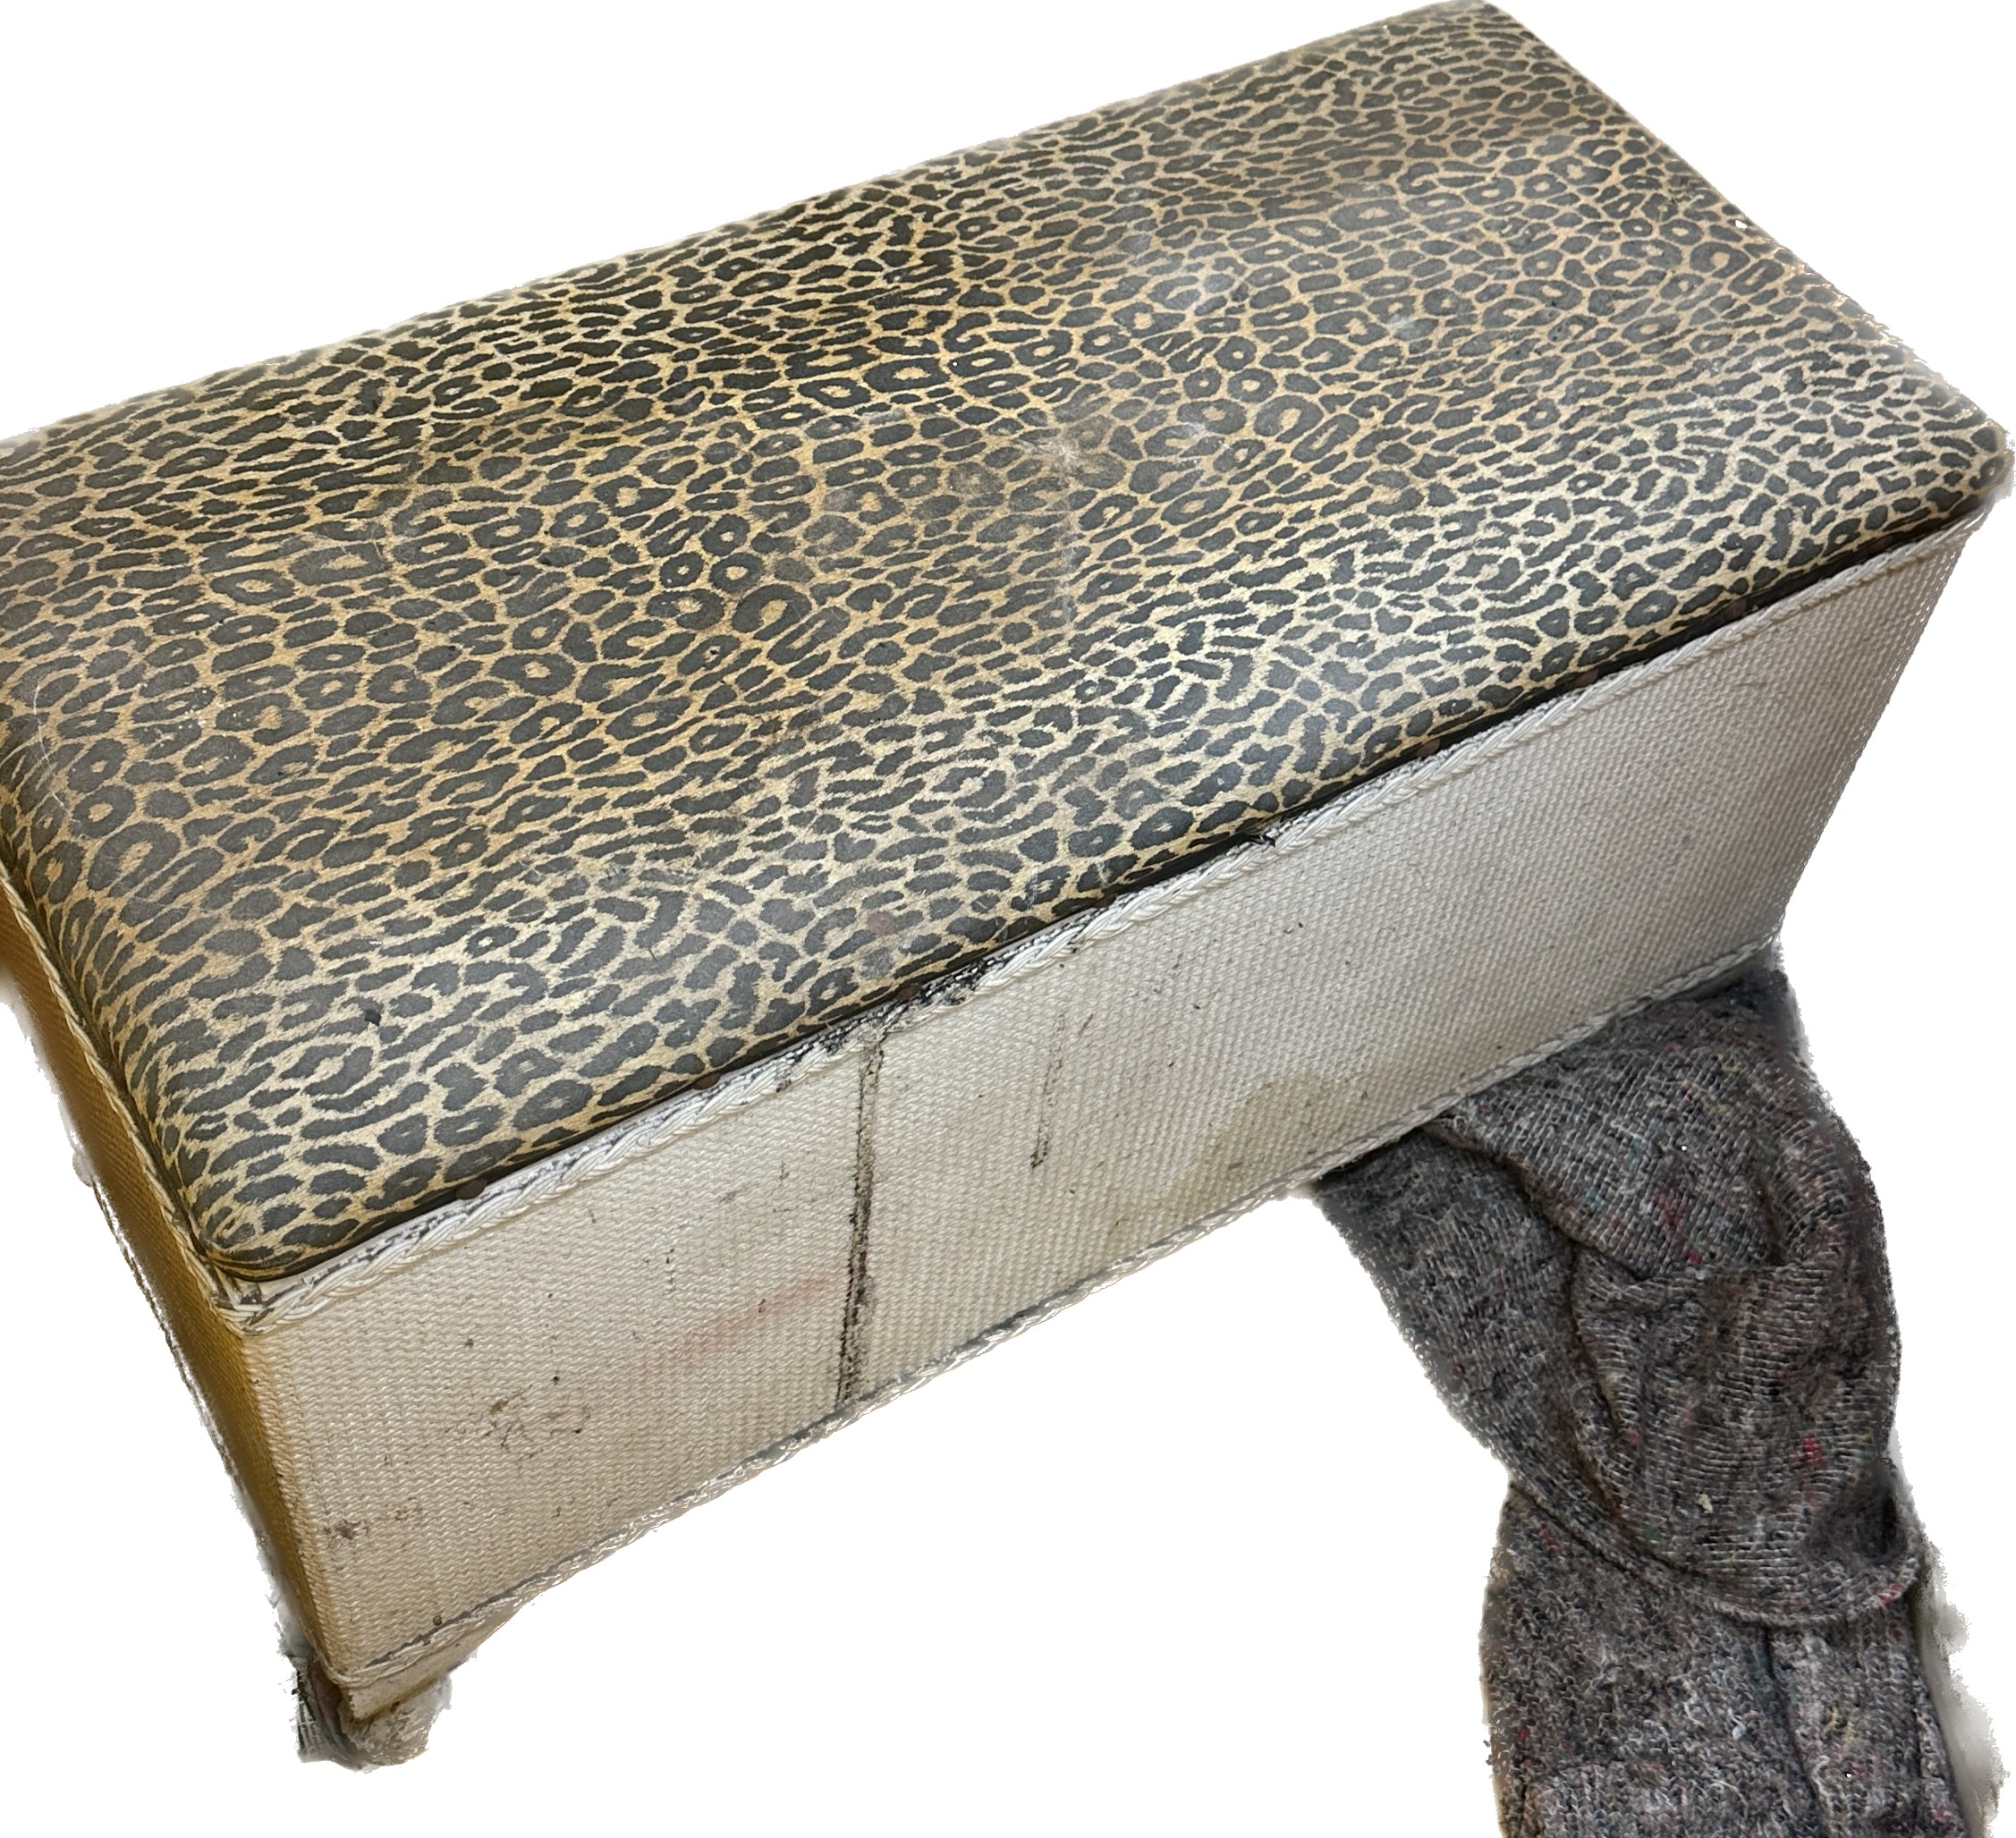 Wicker bedroom ottoman measures approximately 18 inches tall 29 inches wide 15 inches depth